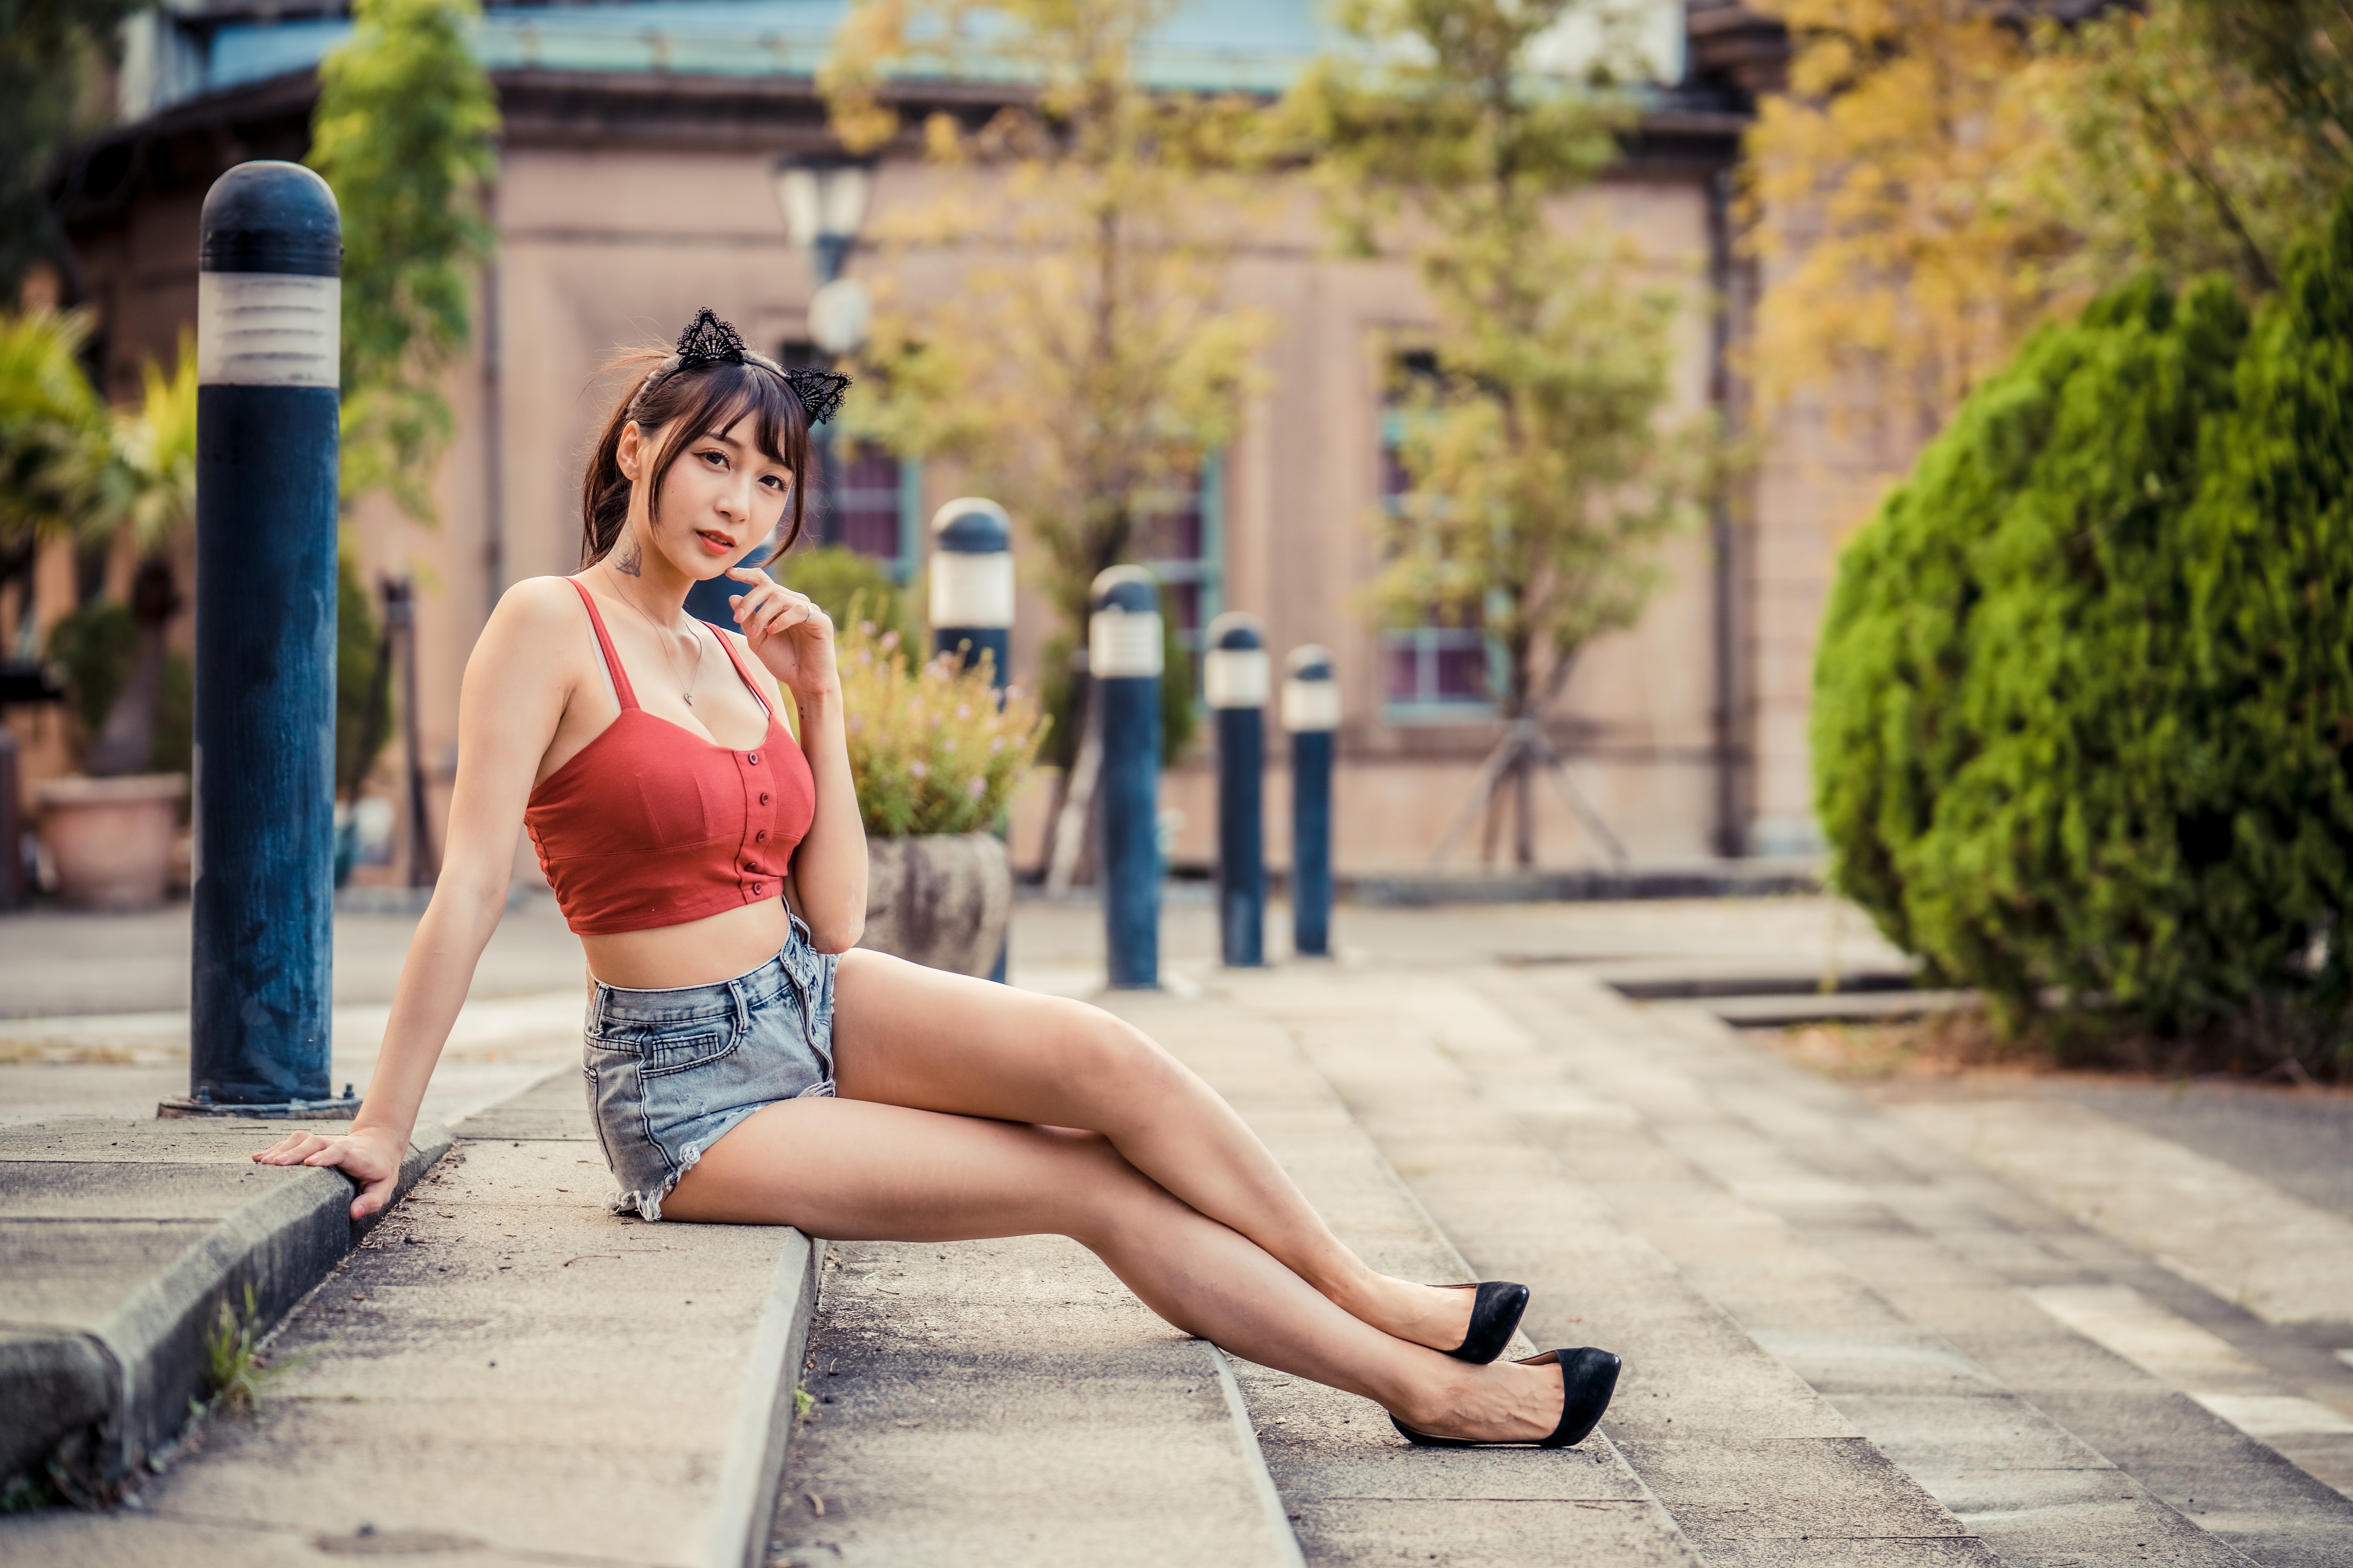 Asian Model Long Hair Depth Of Field Brunette Sitting High Heels Red Tops Stairs Bushes Trees Shorts 4562x3041